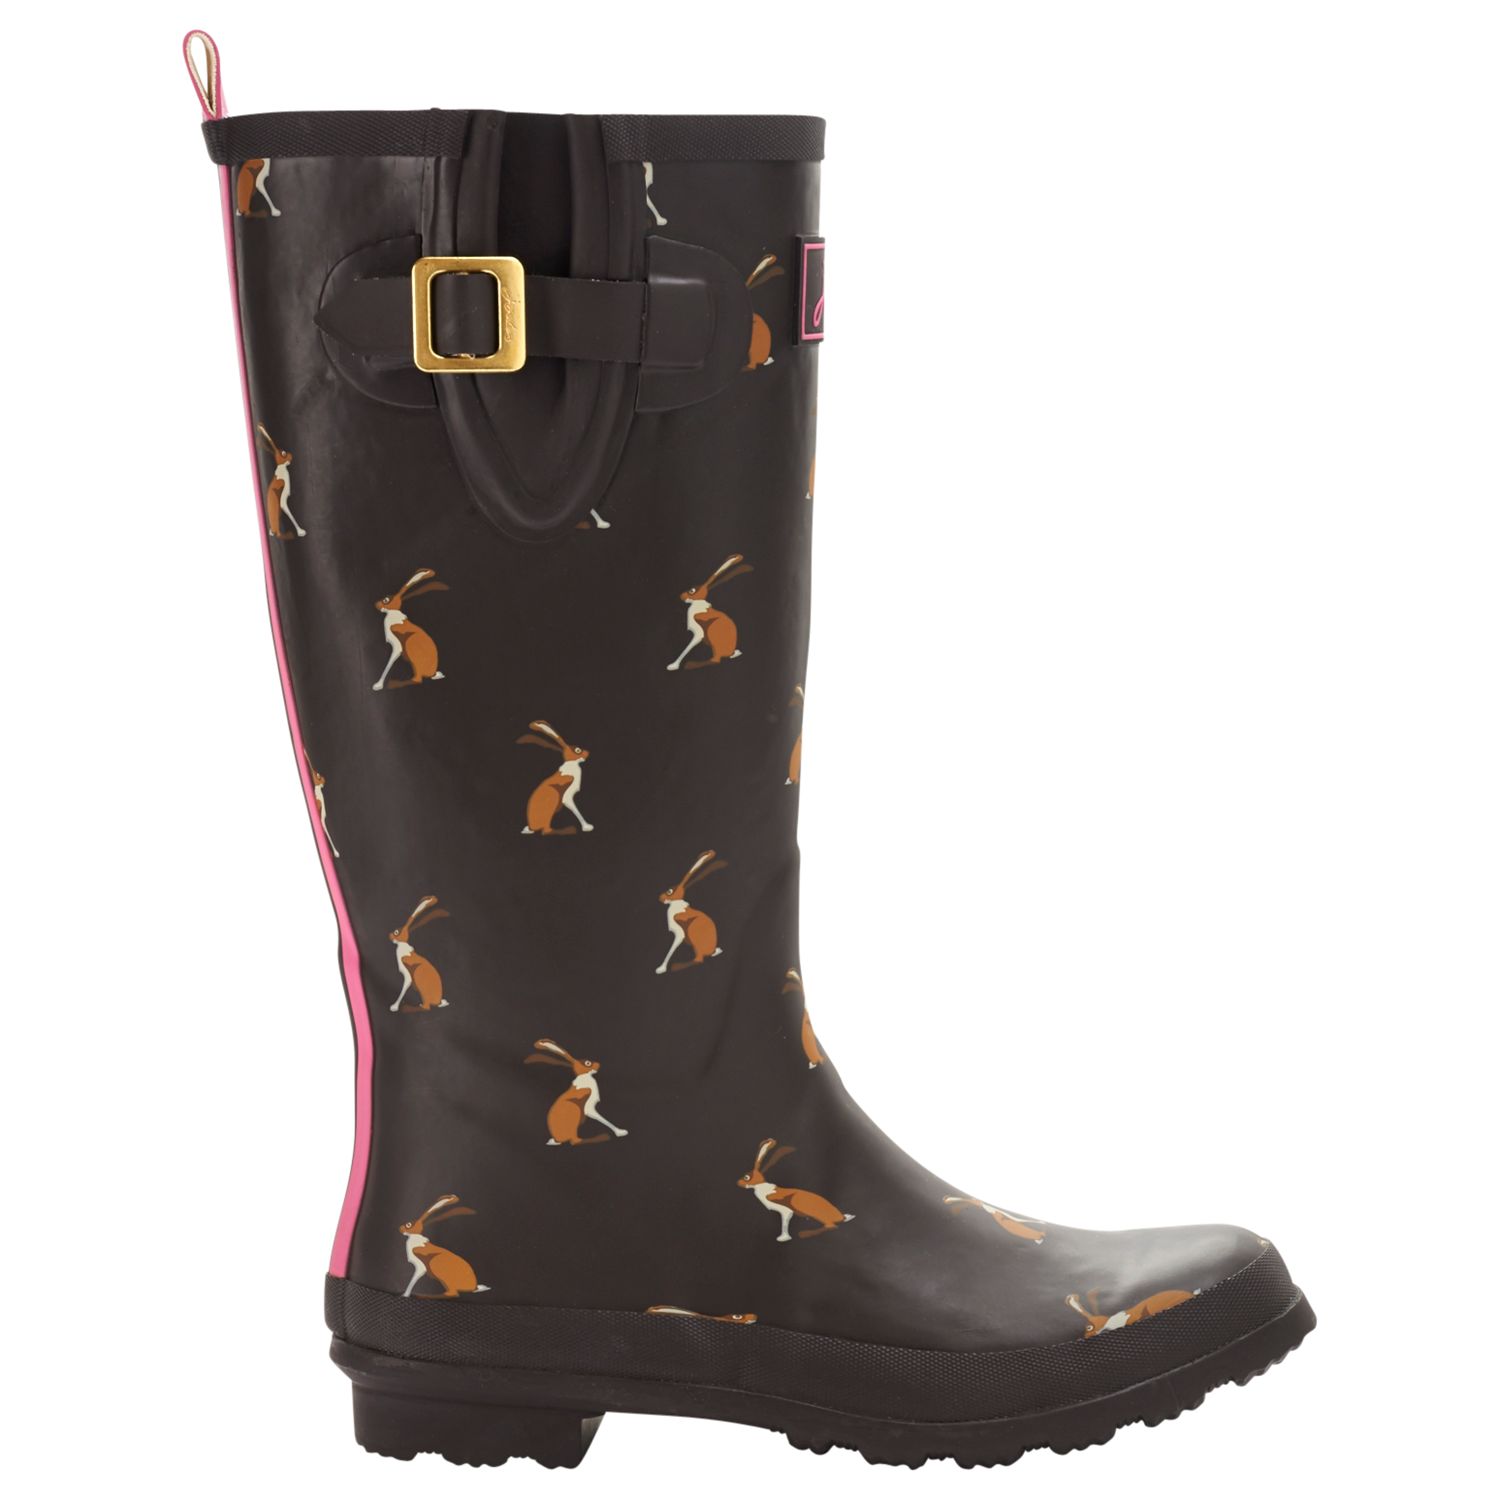 Joules Hare Print Wellington Boots, Brown at John Lewis & Partners